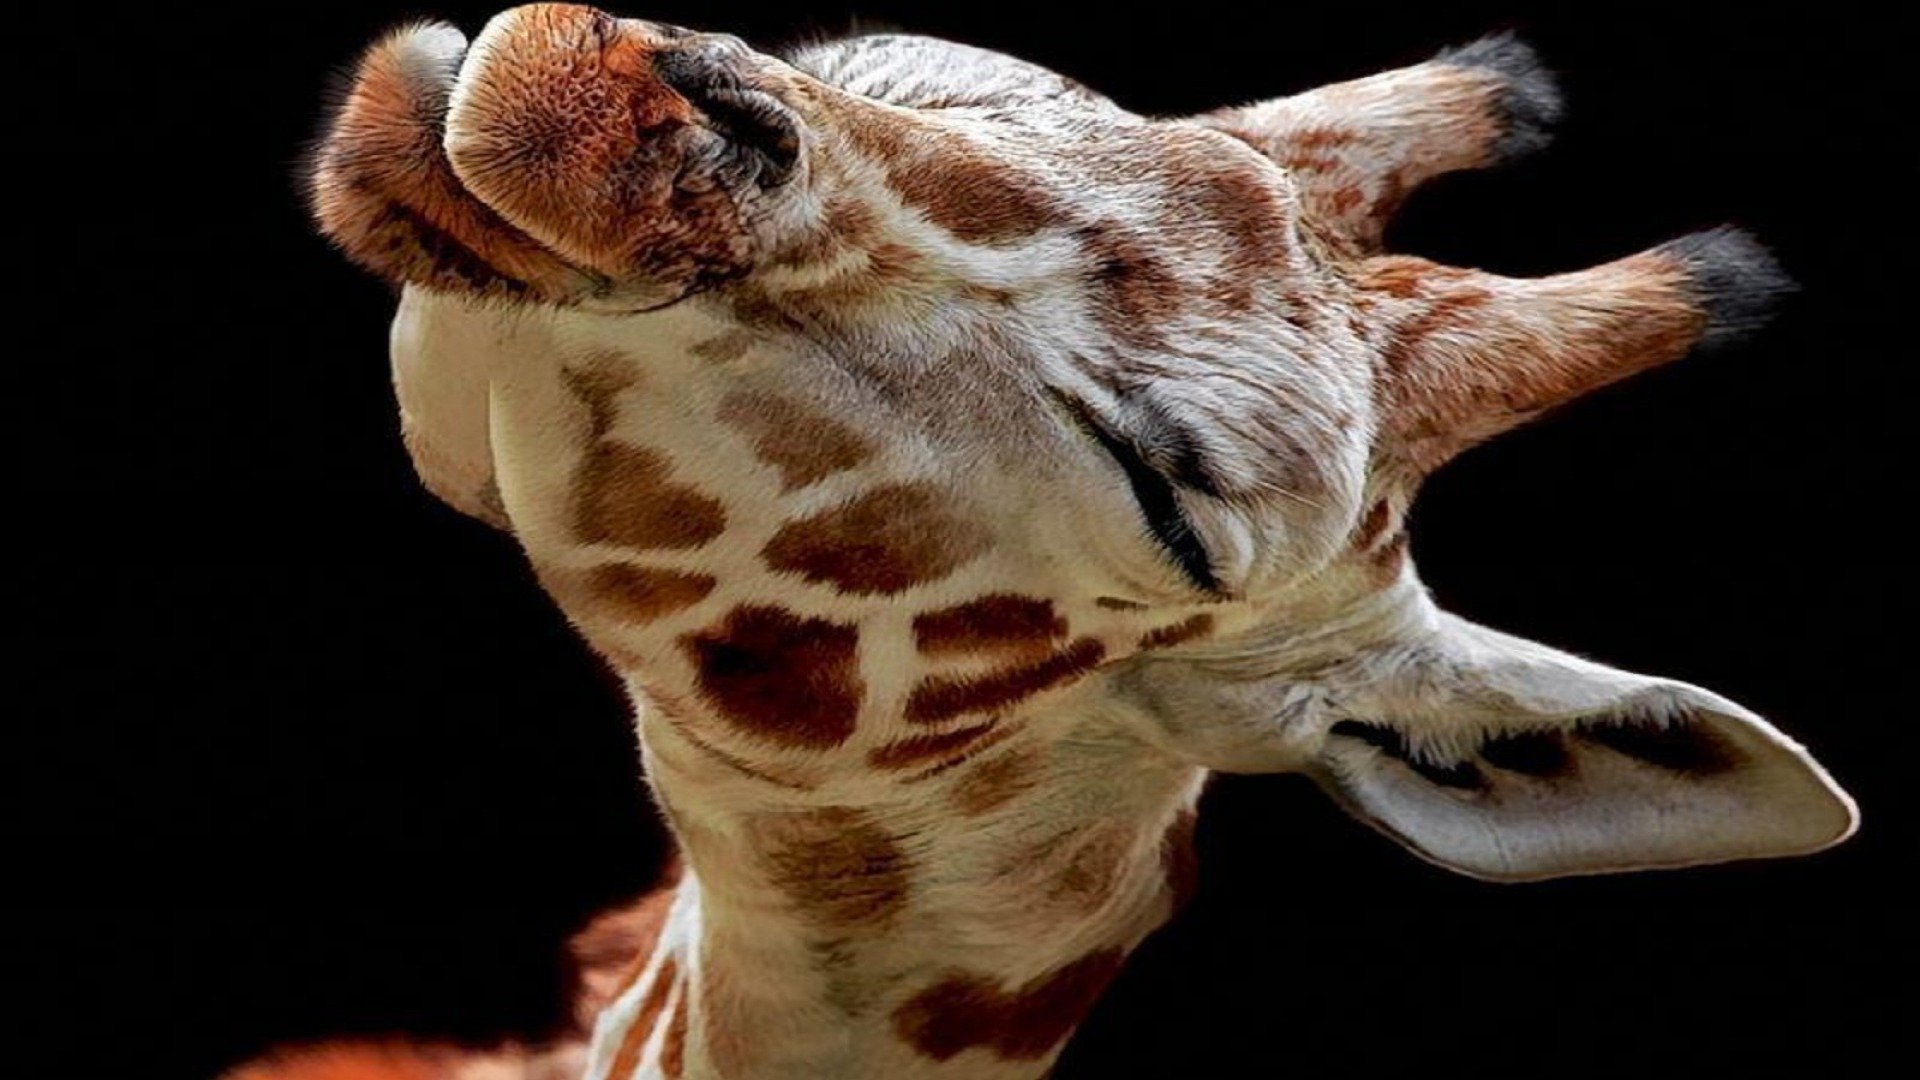 30 Giraffe Wallpapers HD 4K 5K for PC and Mobile  Download free images  for iPhone Android